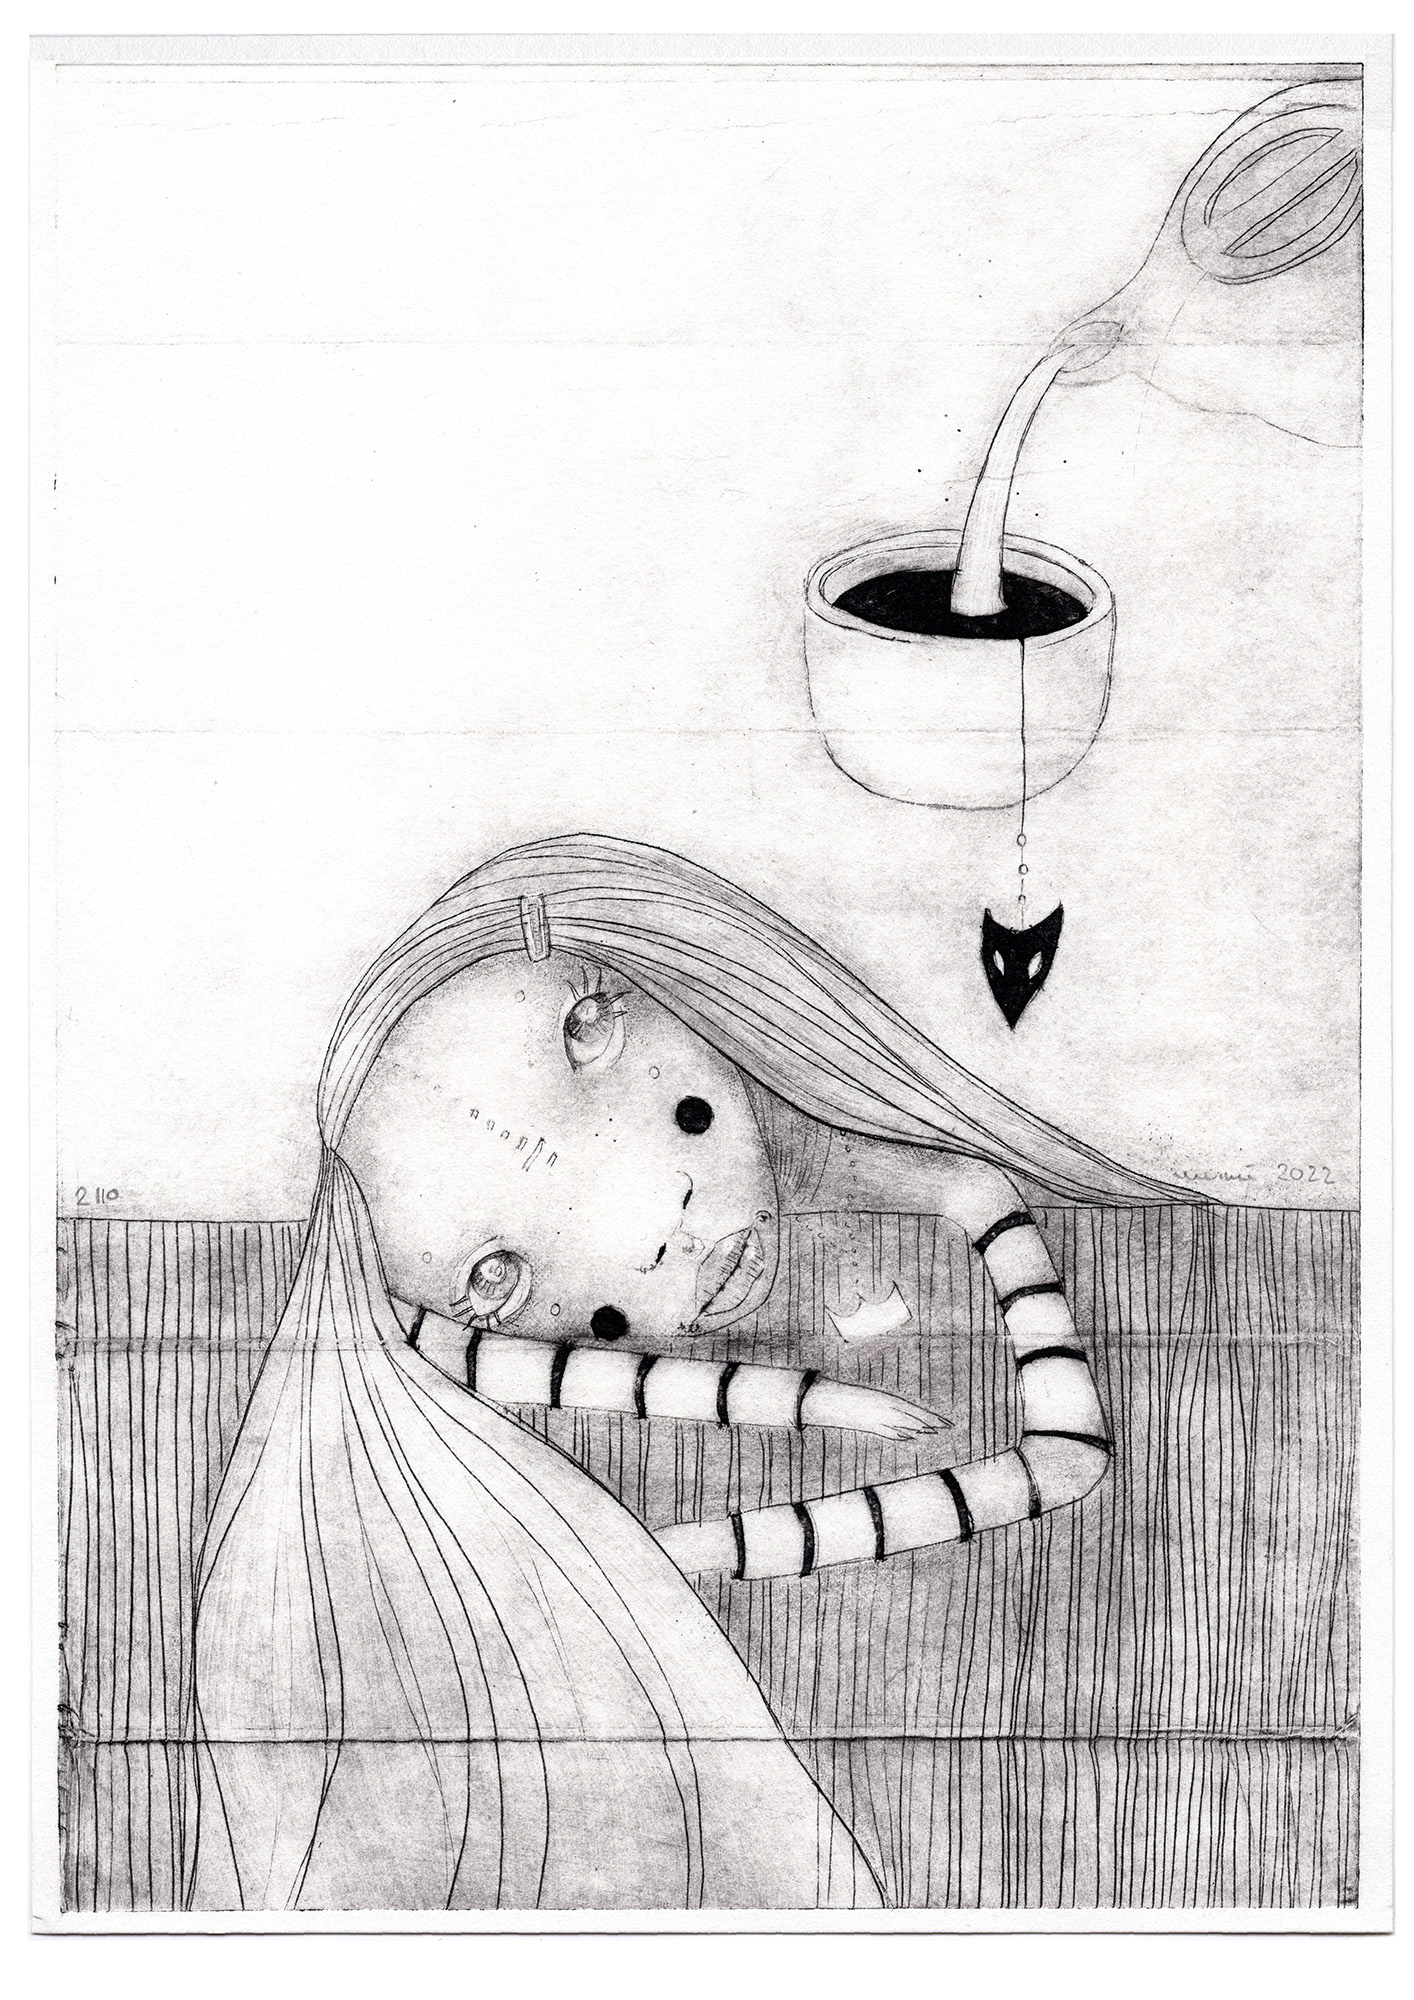 Conversations with my teacup, Collagraph print by minu